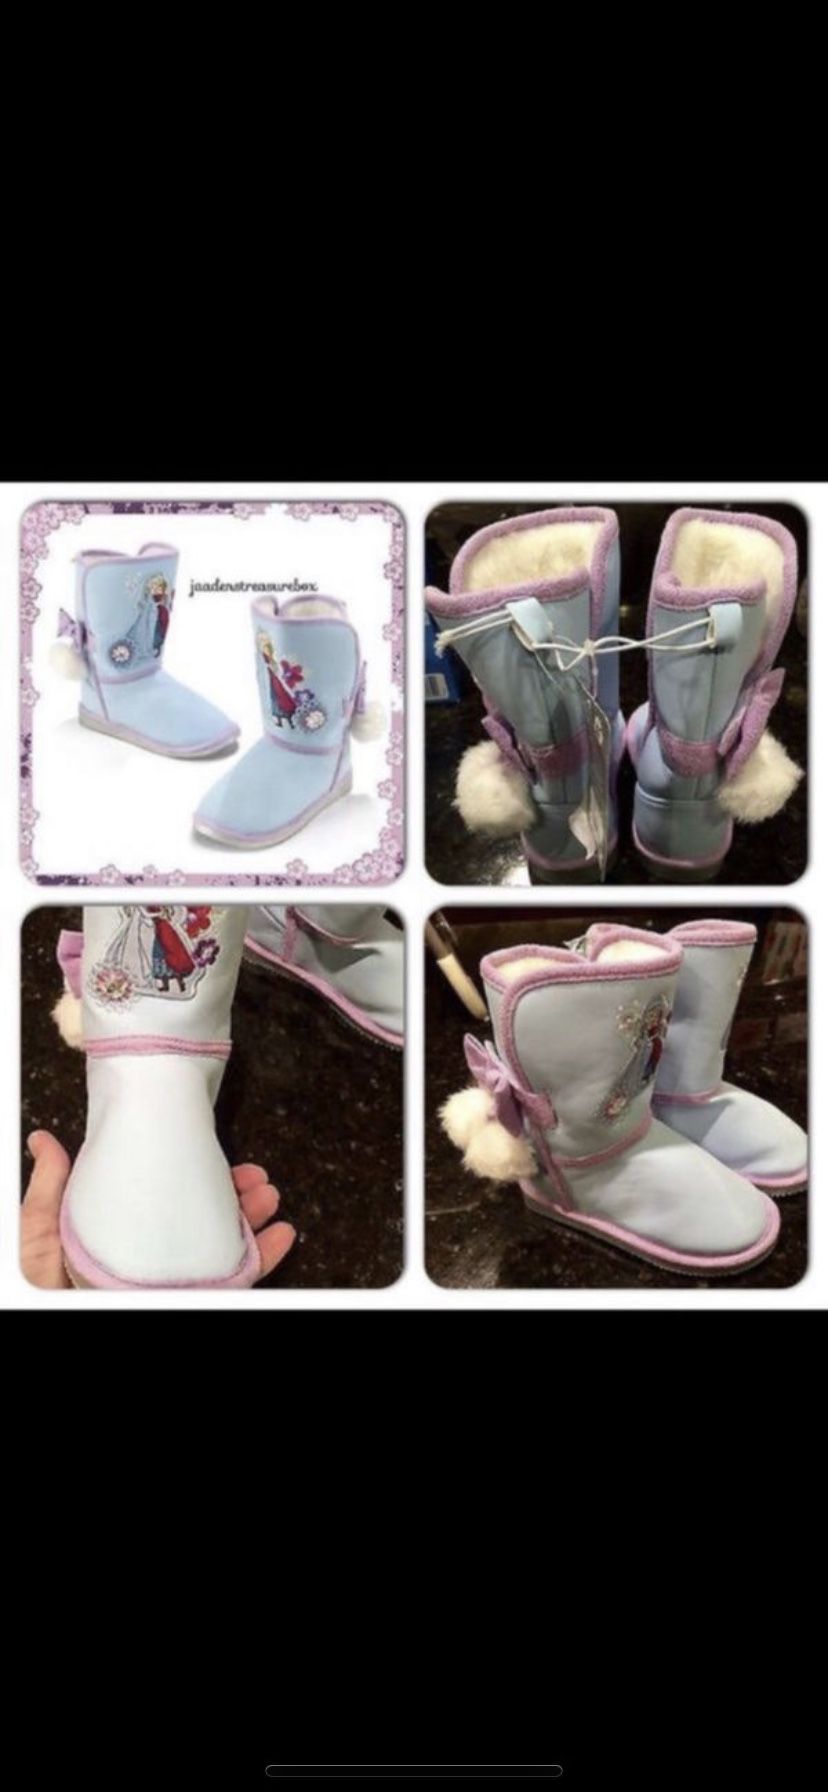 Authentic Disney Store Frozen Winter Snow Boots Elsa Anna Blue Size 7 - NWT Brand New Pair of adorable Disney Frozen winter boots for girls. Size 7